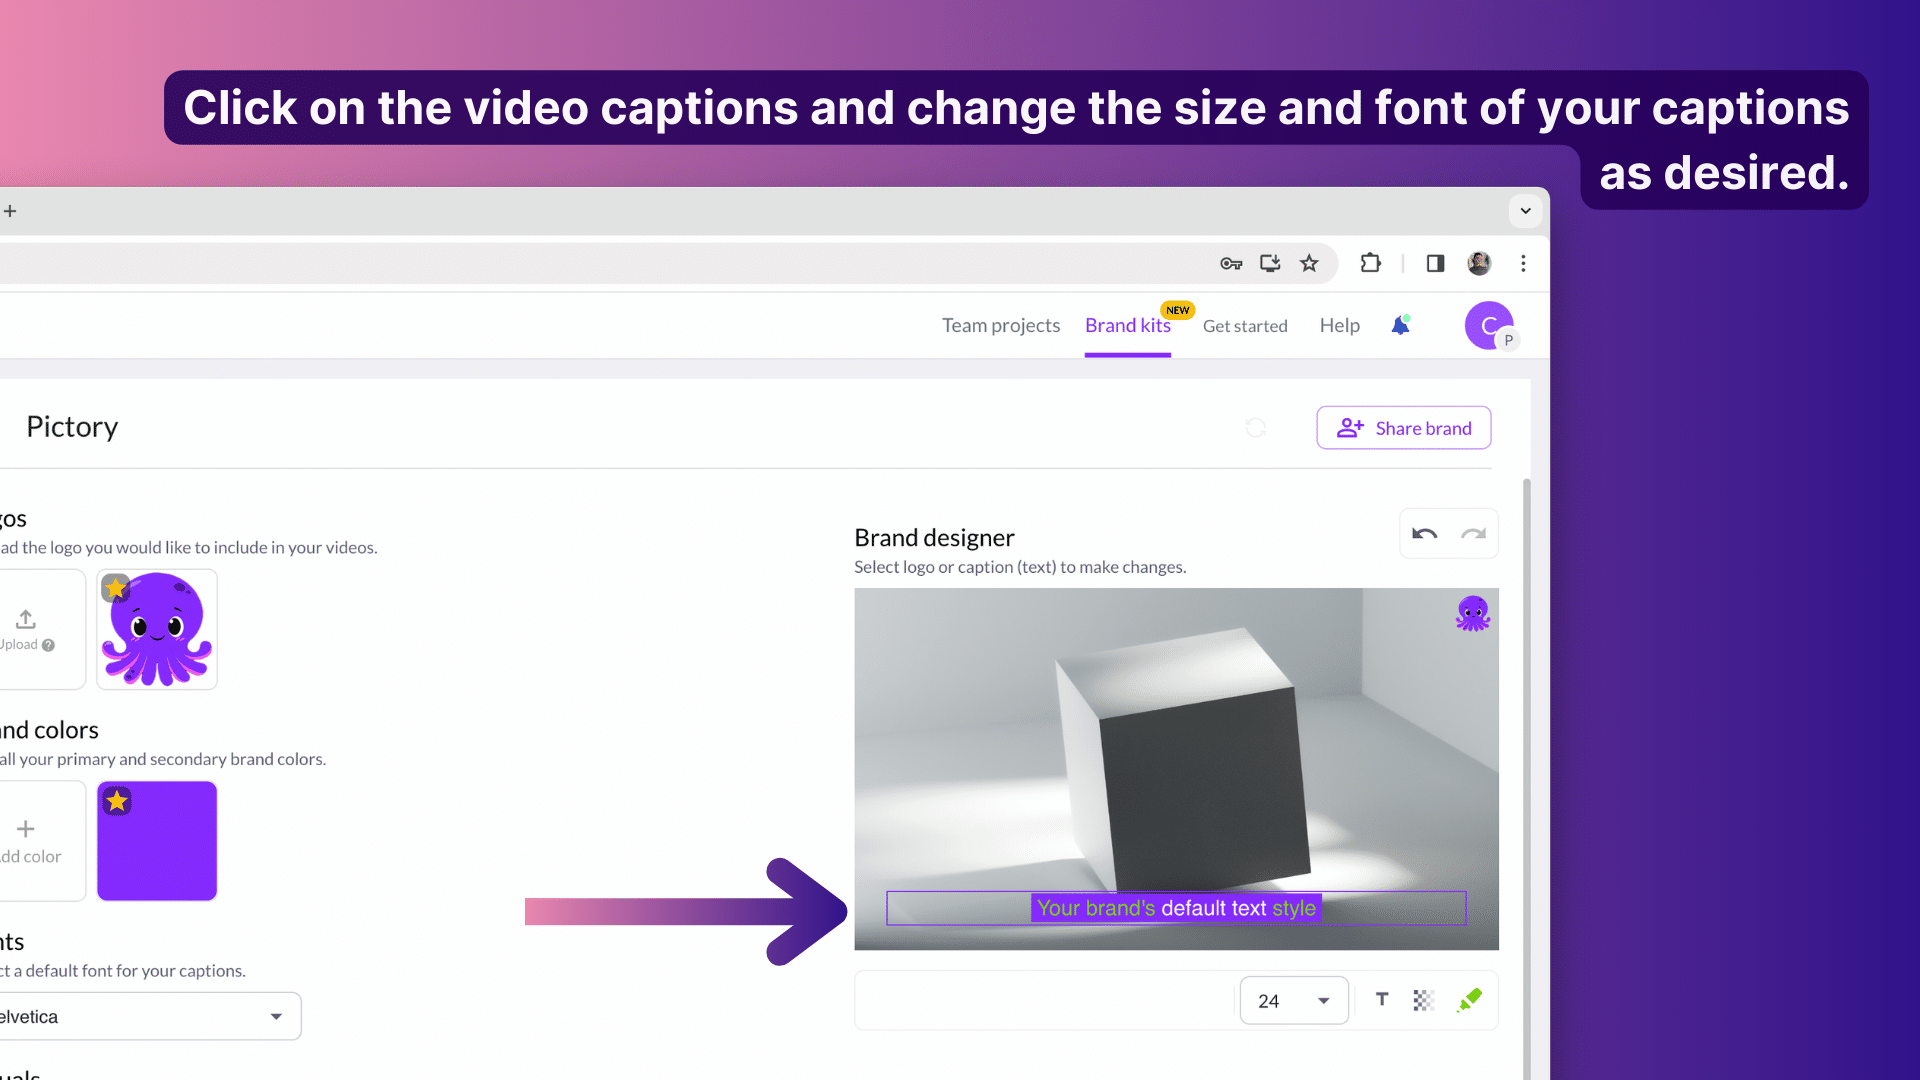 Change the size and font of your captions as desired